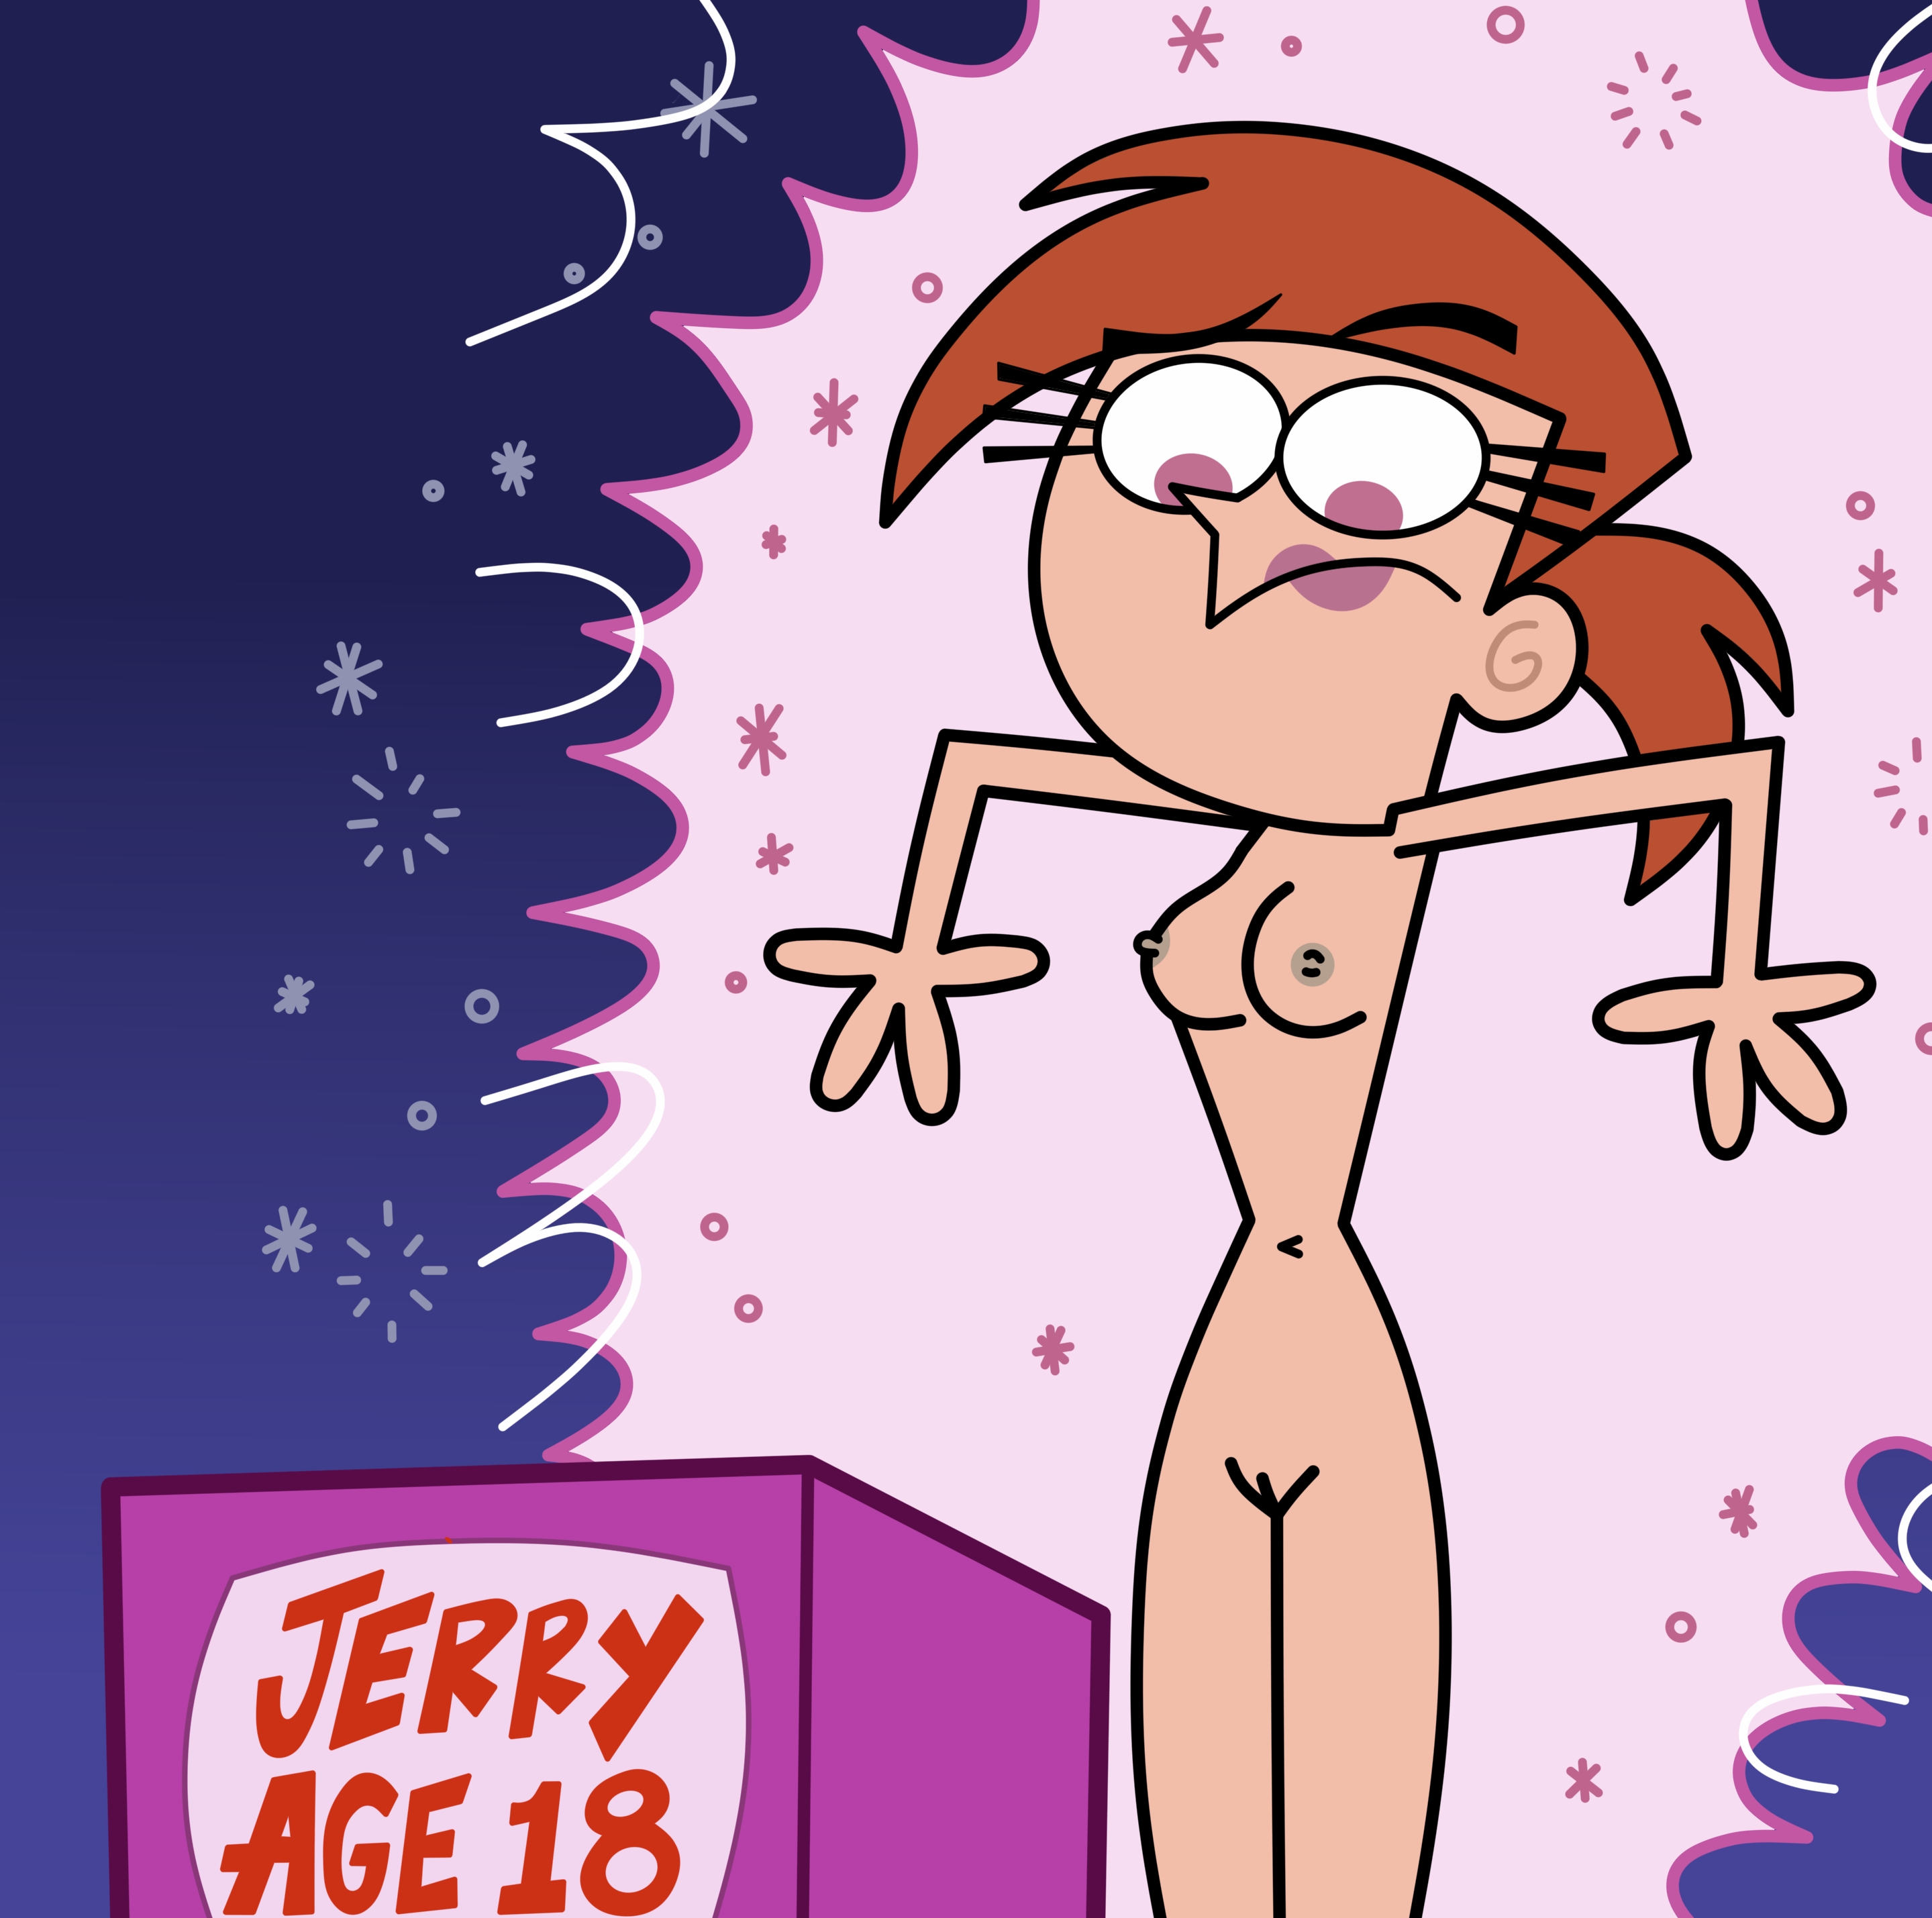 Vicky from fairly odd parents nude